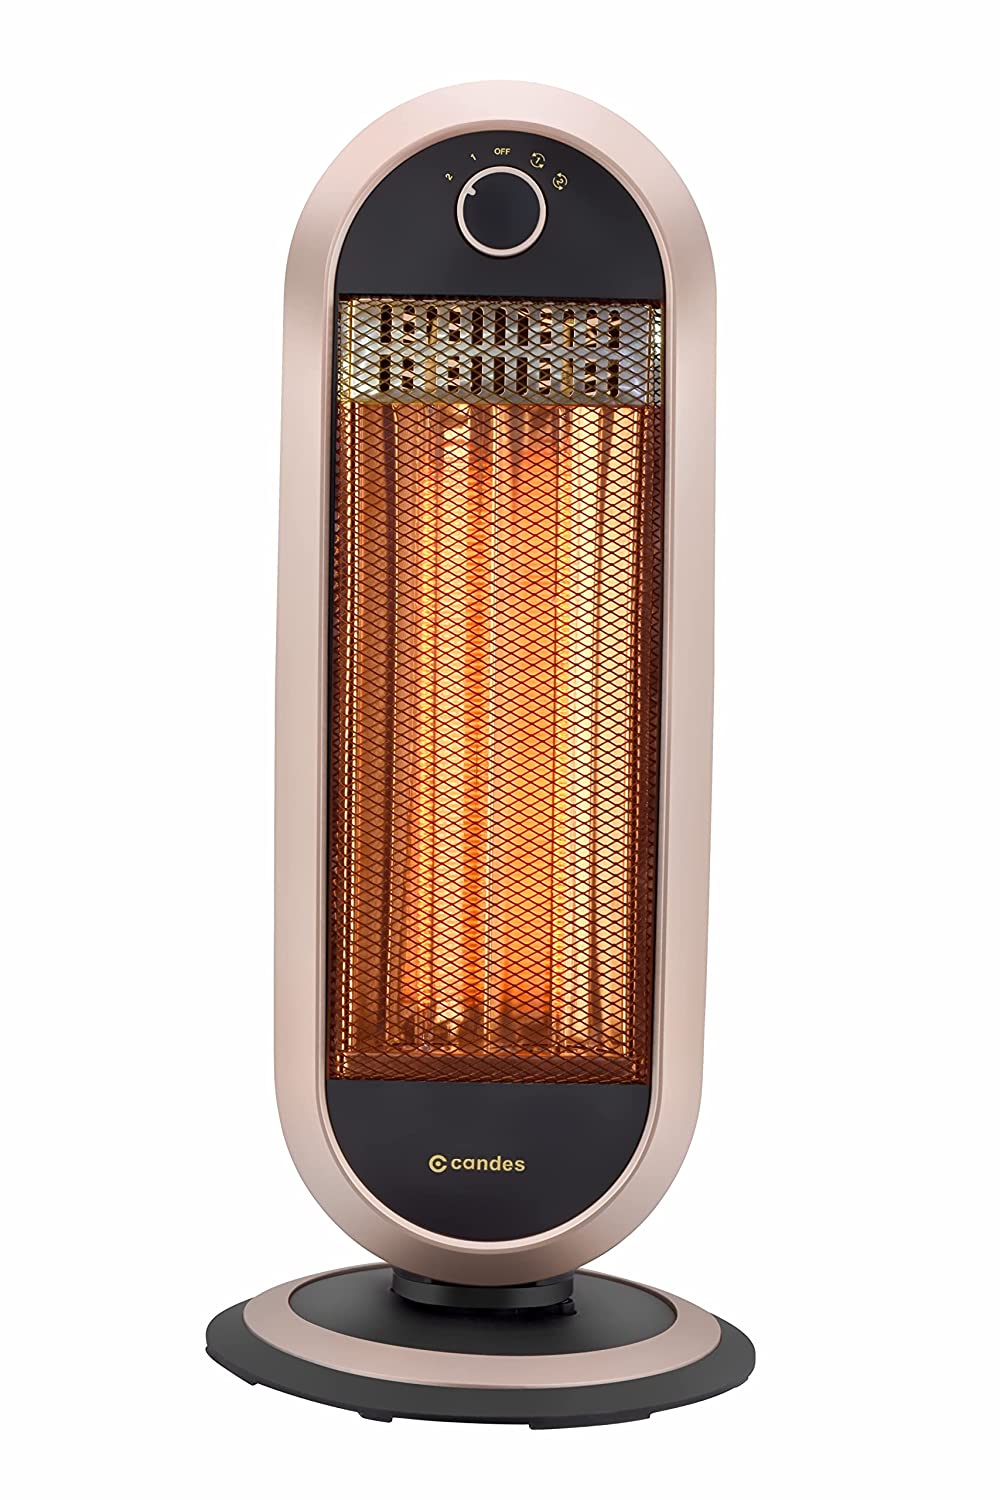 Carbon 2 Rod Room Heater for Winter with 2 Heat Setting - 500W/1000W (Black/Brown)